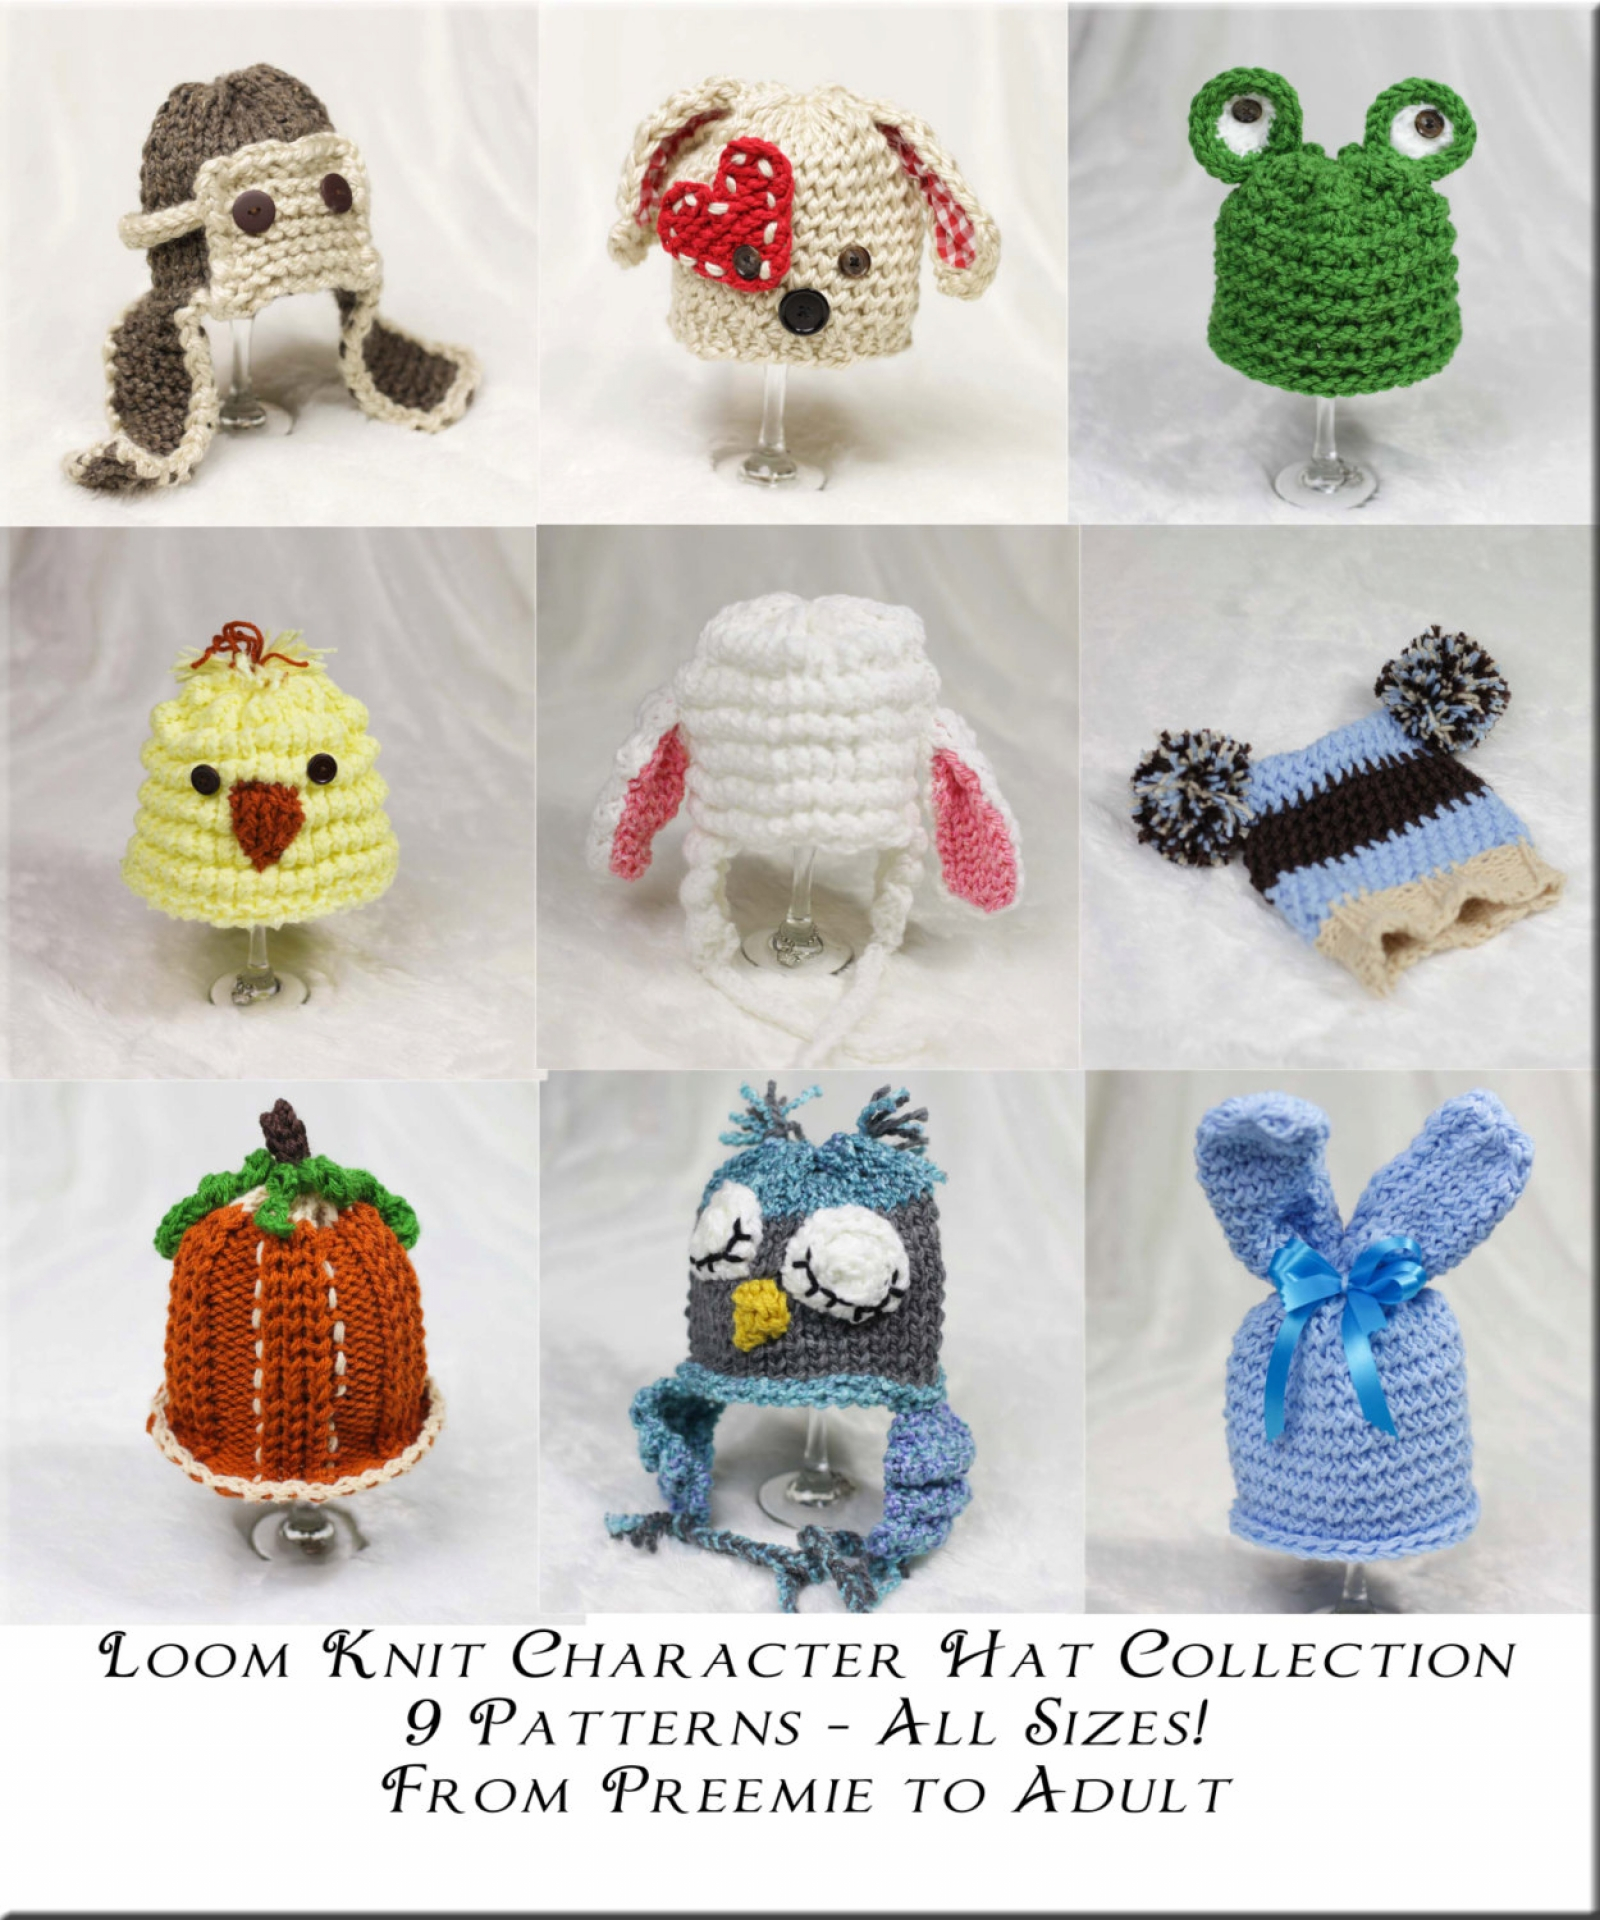 Frog Hat Knitting Pattern Loom Knit Character Hat Pattern Collection 9 Adorable Patterns Included Bunny Lamb Frog Pumpkin Puppy Aviator Owl Chickpom Pom Hat